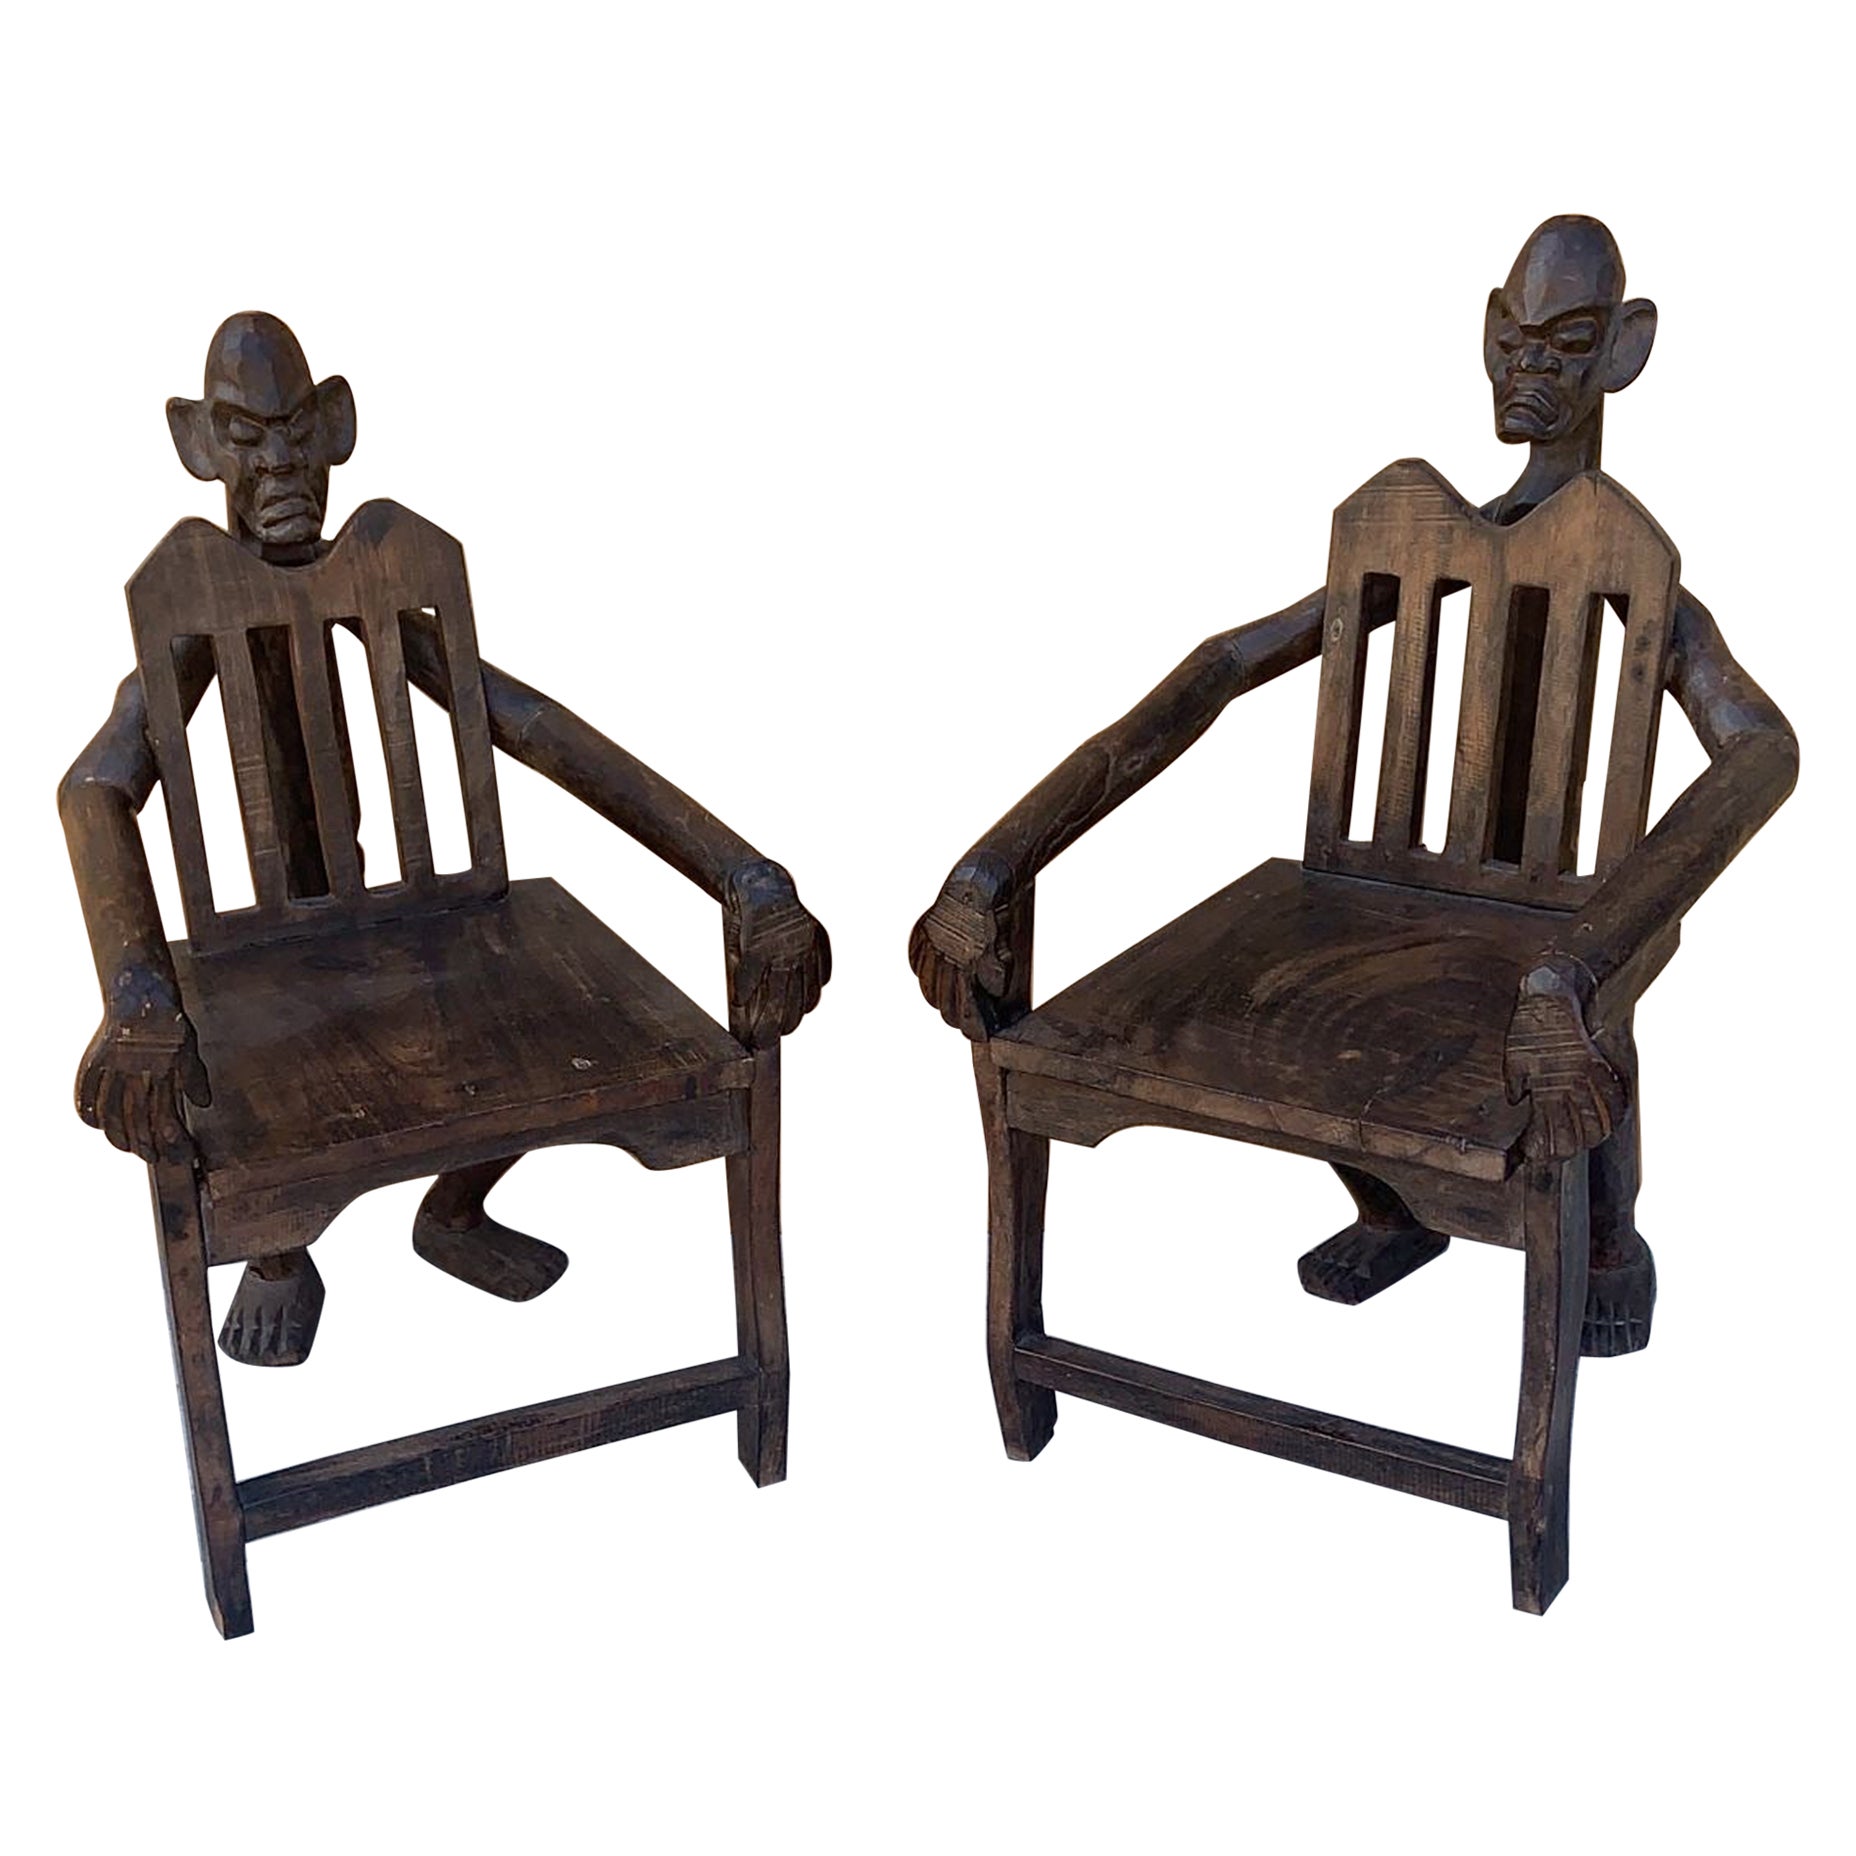 Antique African Tribal Figural Carved Armchairs - Set of 2